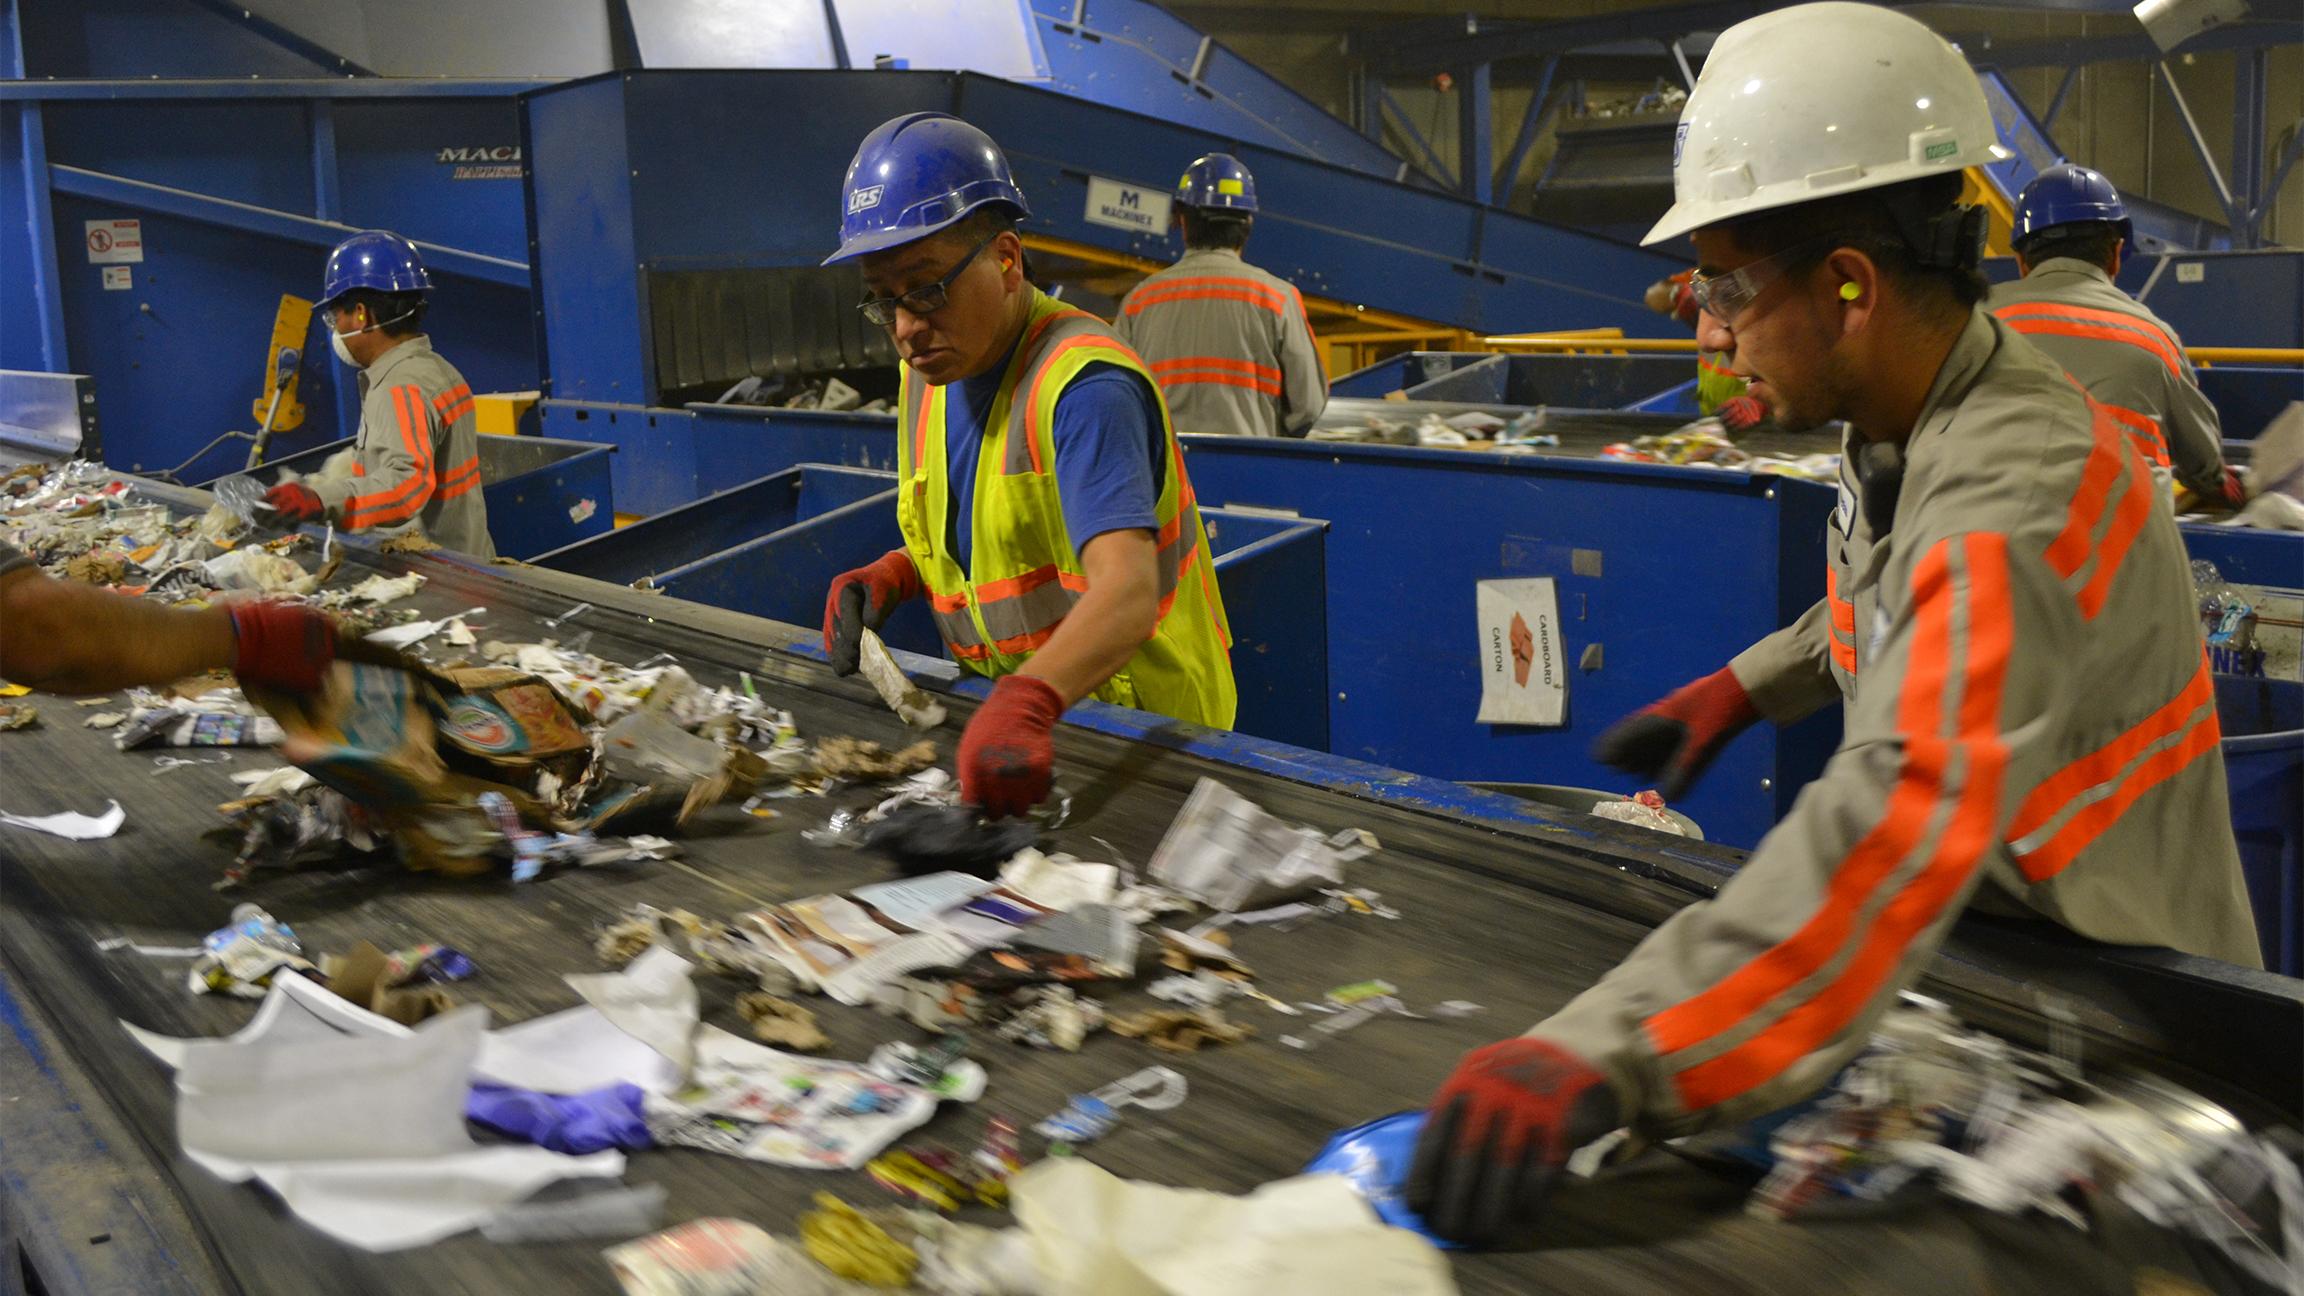 Inside the process to get a new garbage can in Chicago - Axios Chicago